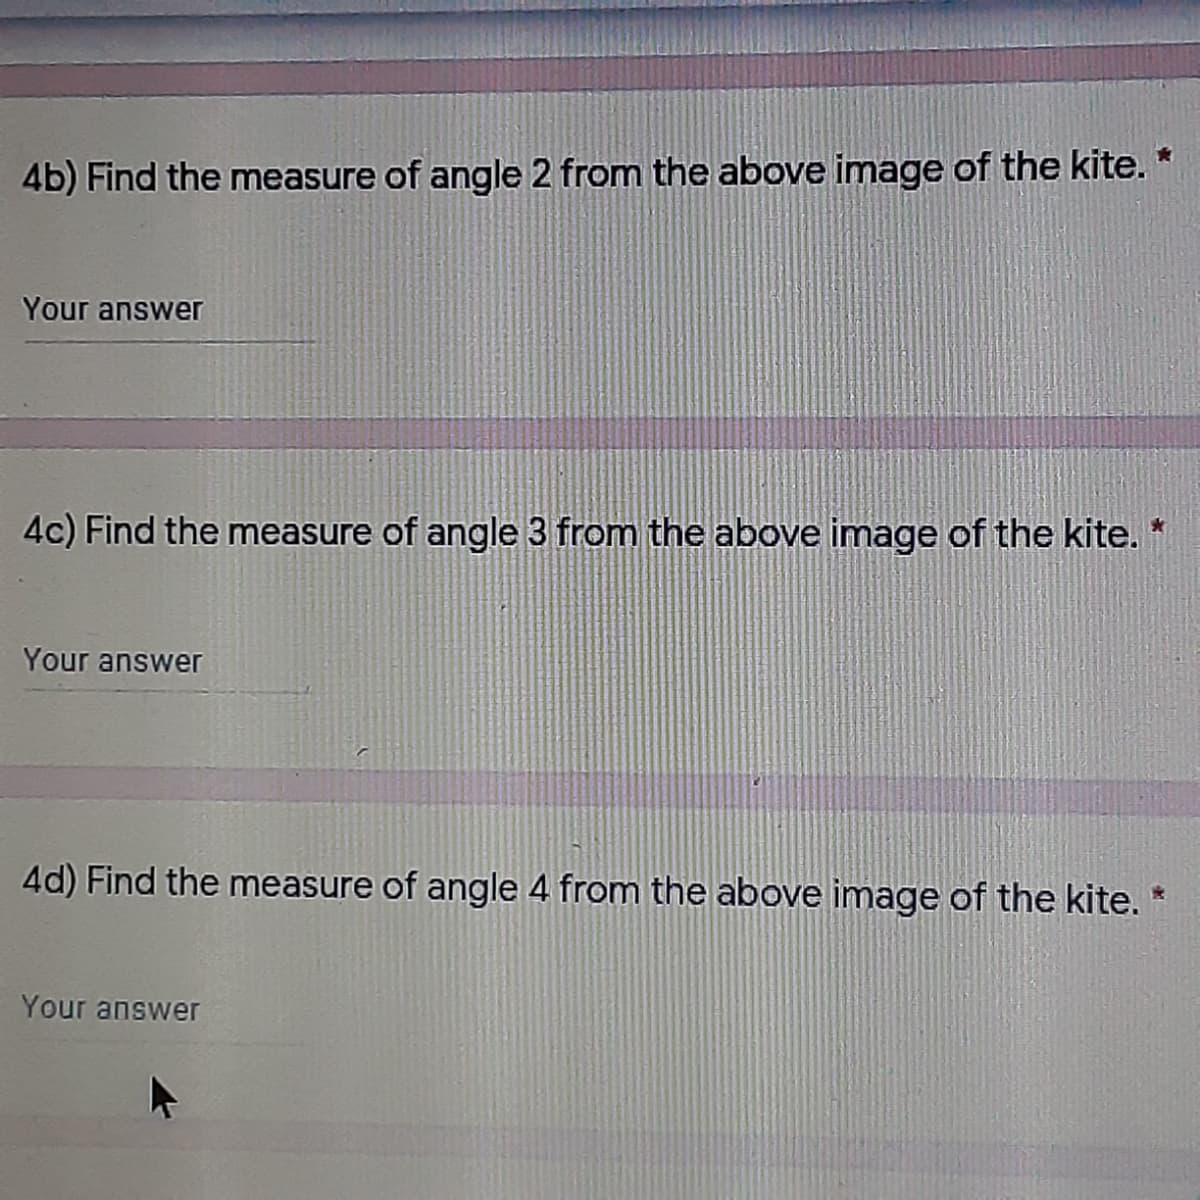 4b) Find the measure of angle 2 from the above image of the kite. *
Your answer
4c) Find the measure of angle 3 from the above image of the kite.
Your answer
4d) Find the measure of angle 4 from the above image of the kite.
Your answer
